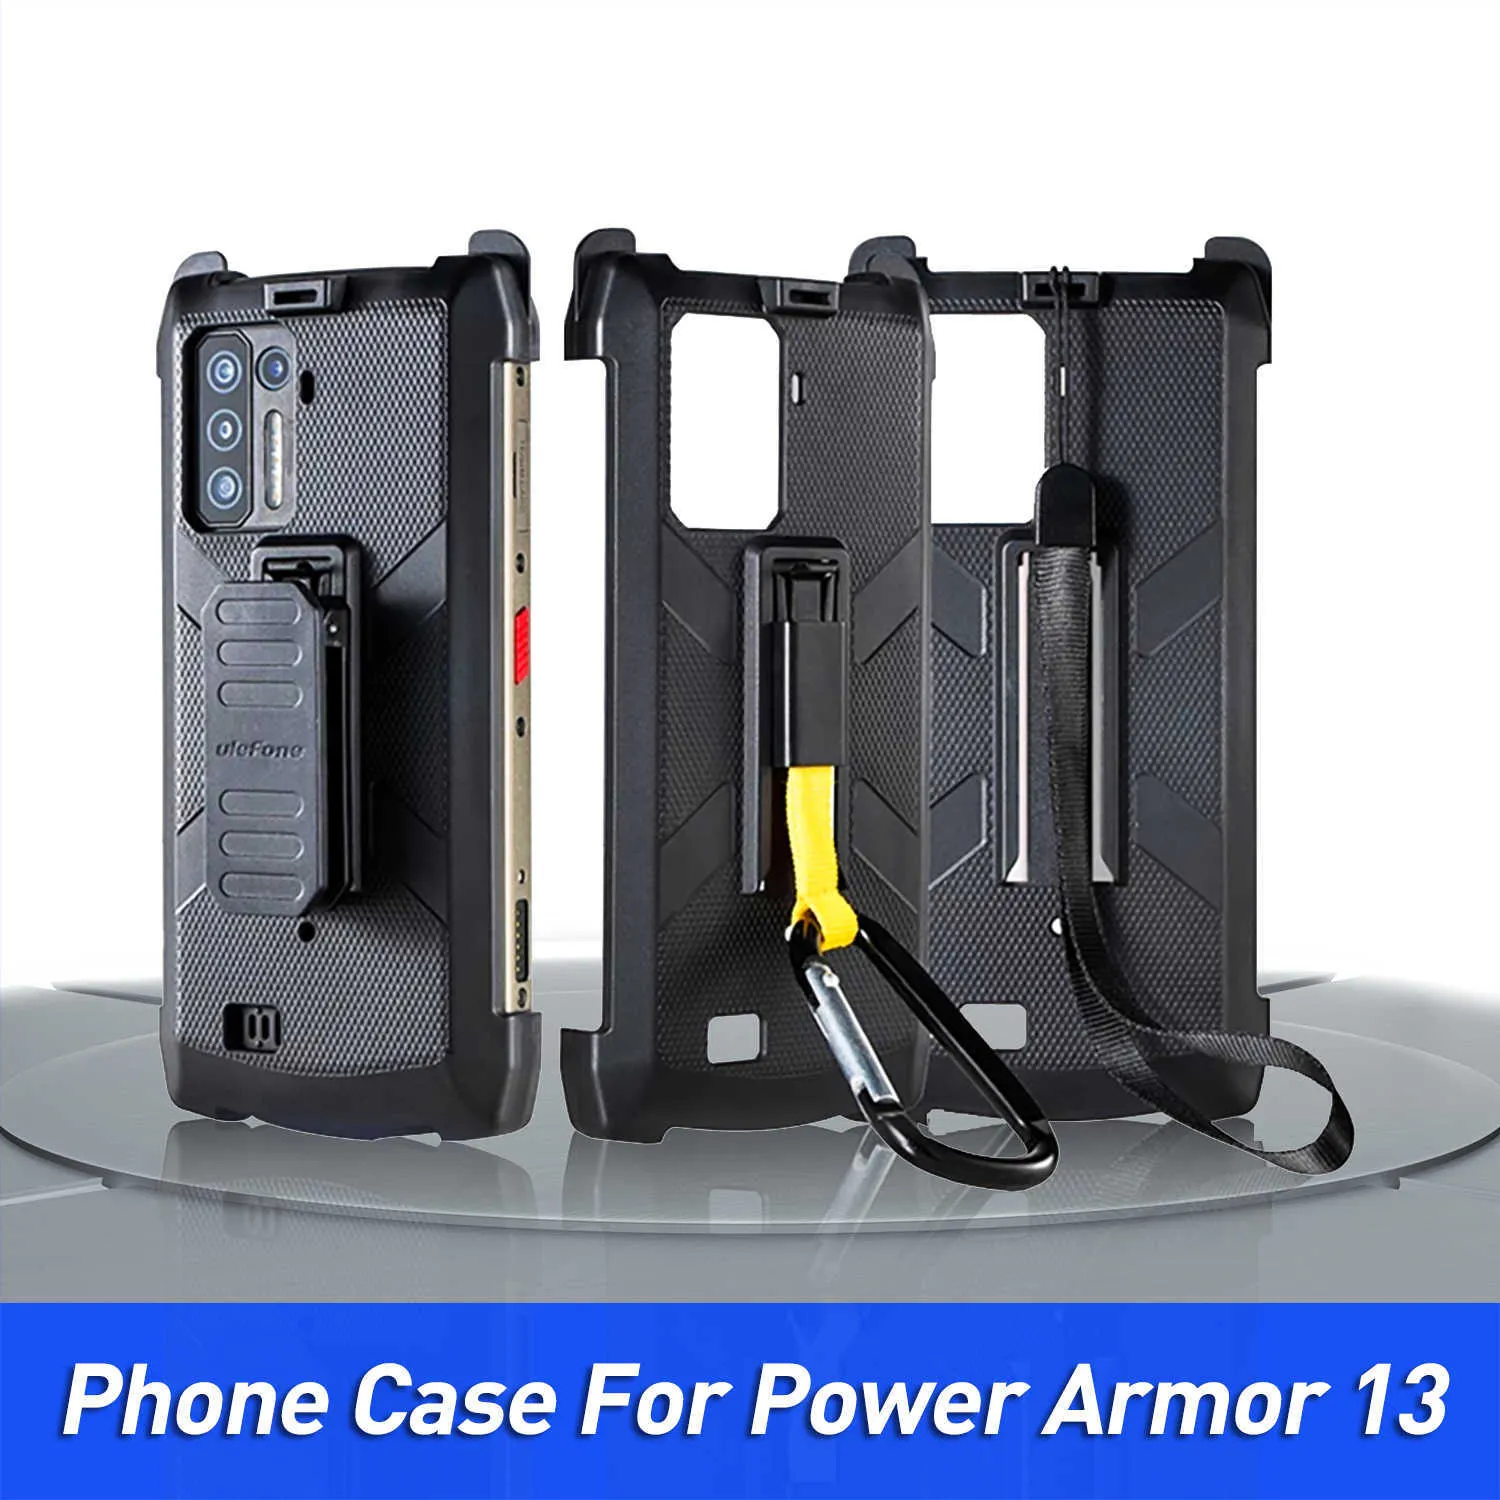 Cell Phone Cases Original Ulefone For Power Armor 13 Smartphone Rugged Protective for Outdoor with Belt Clip and Carabiner 2021 W221014